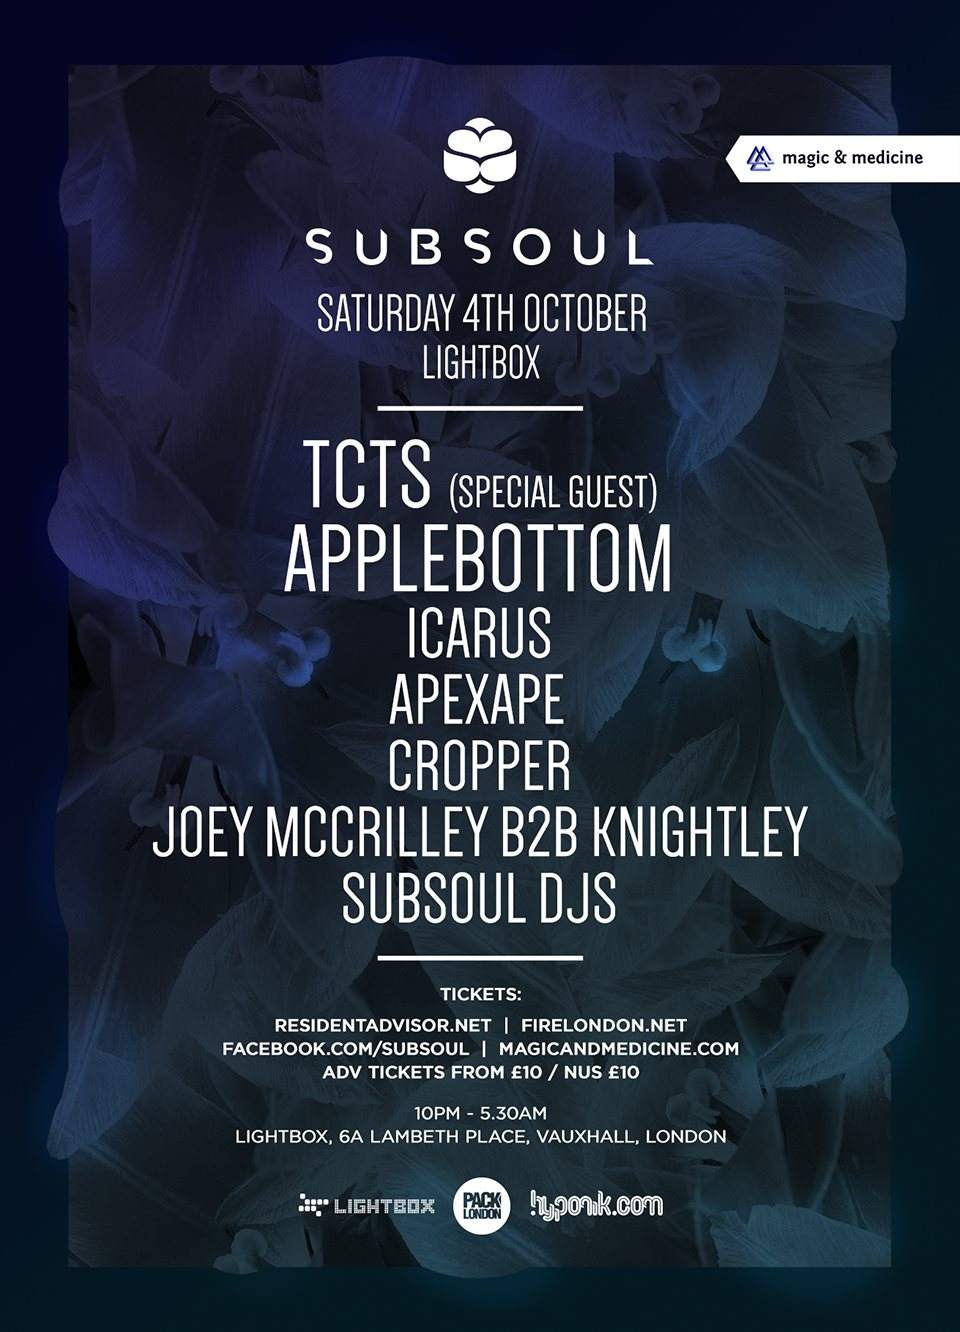 Subsoul with Tcts, Applebottom, Icarus, Apexape, Cropper, Subsoul DJs - Página frontal